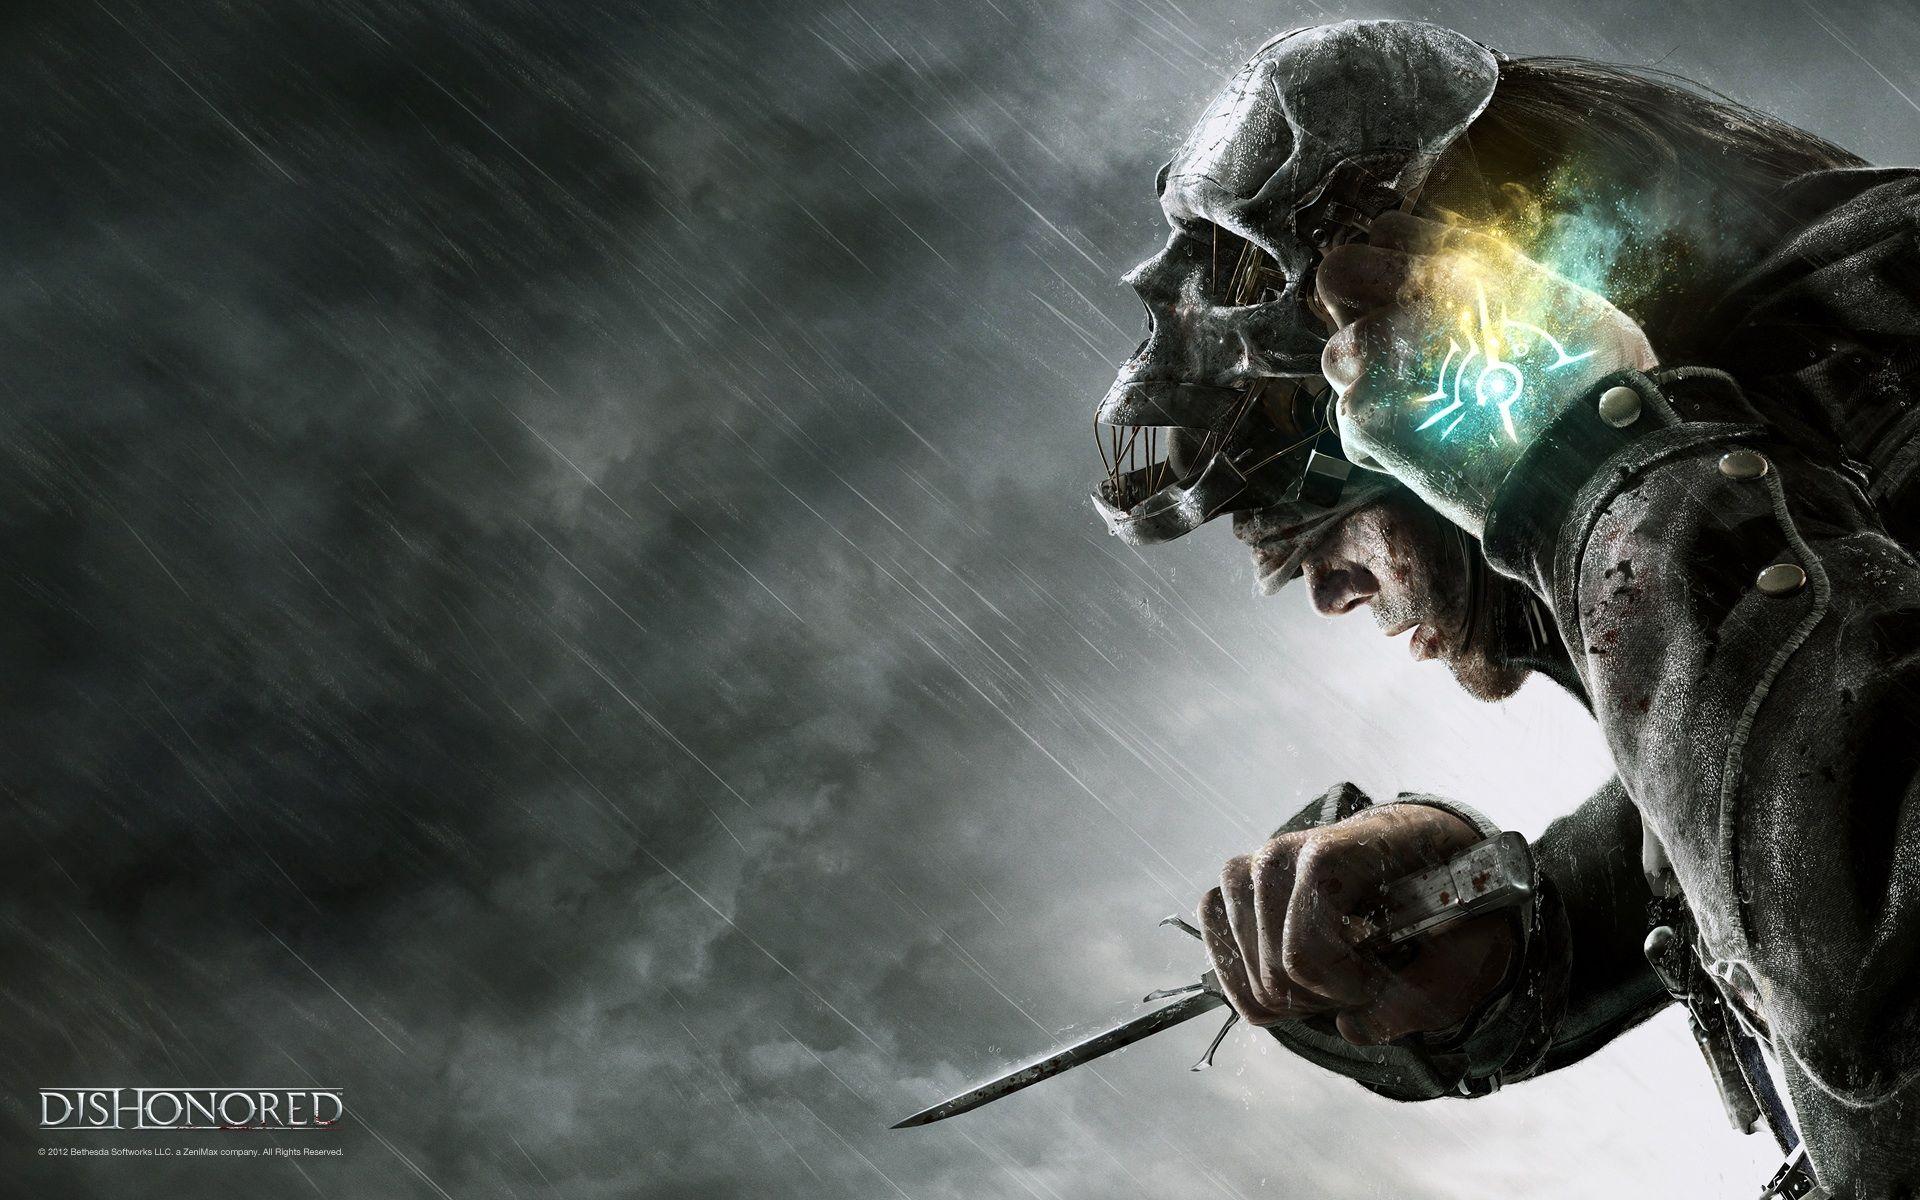 Dishonored Games Wallpaper. WALLPAPERS In 2018